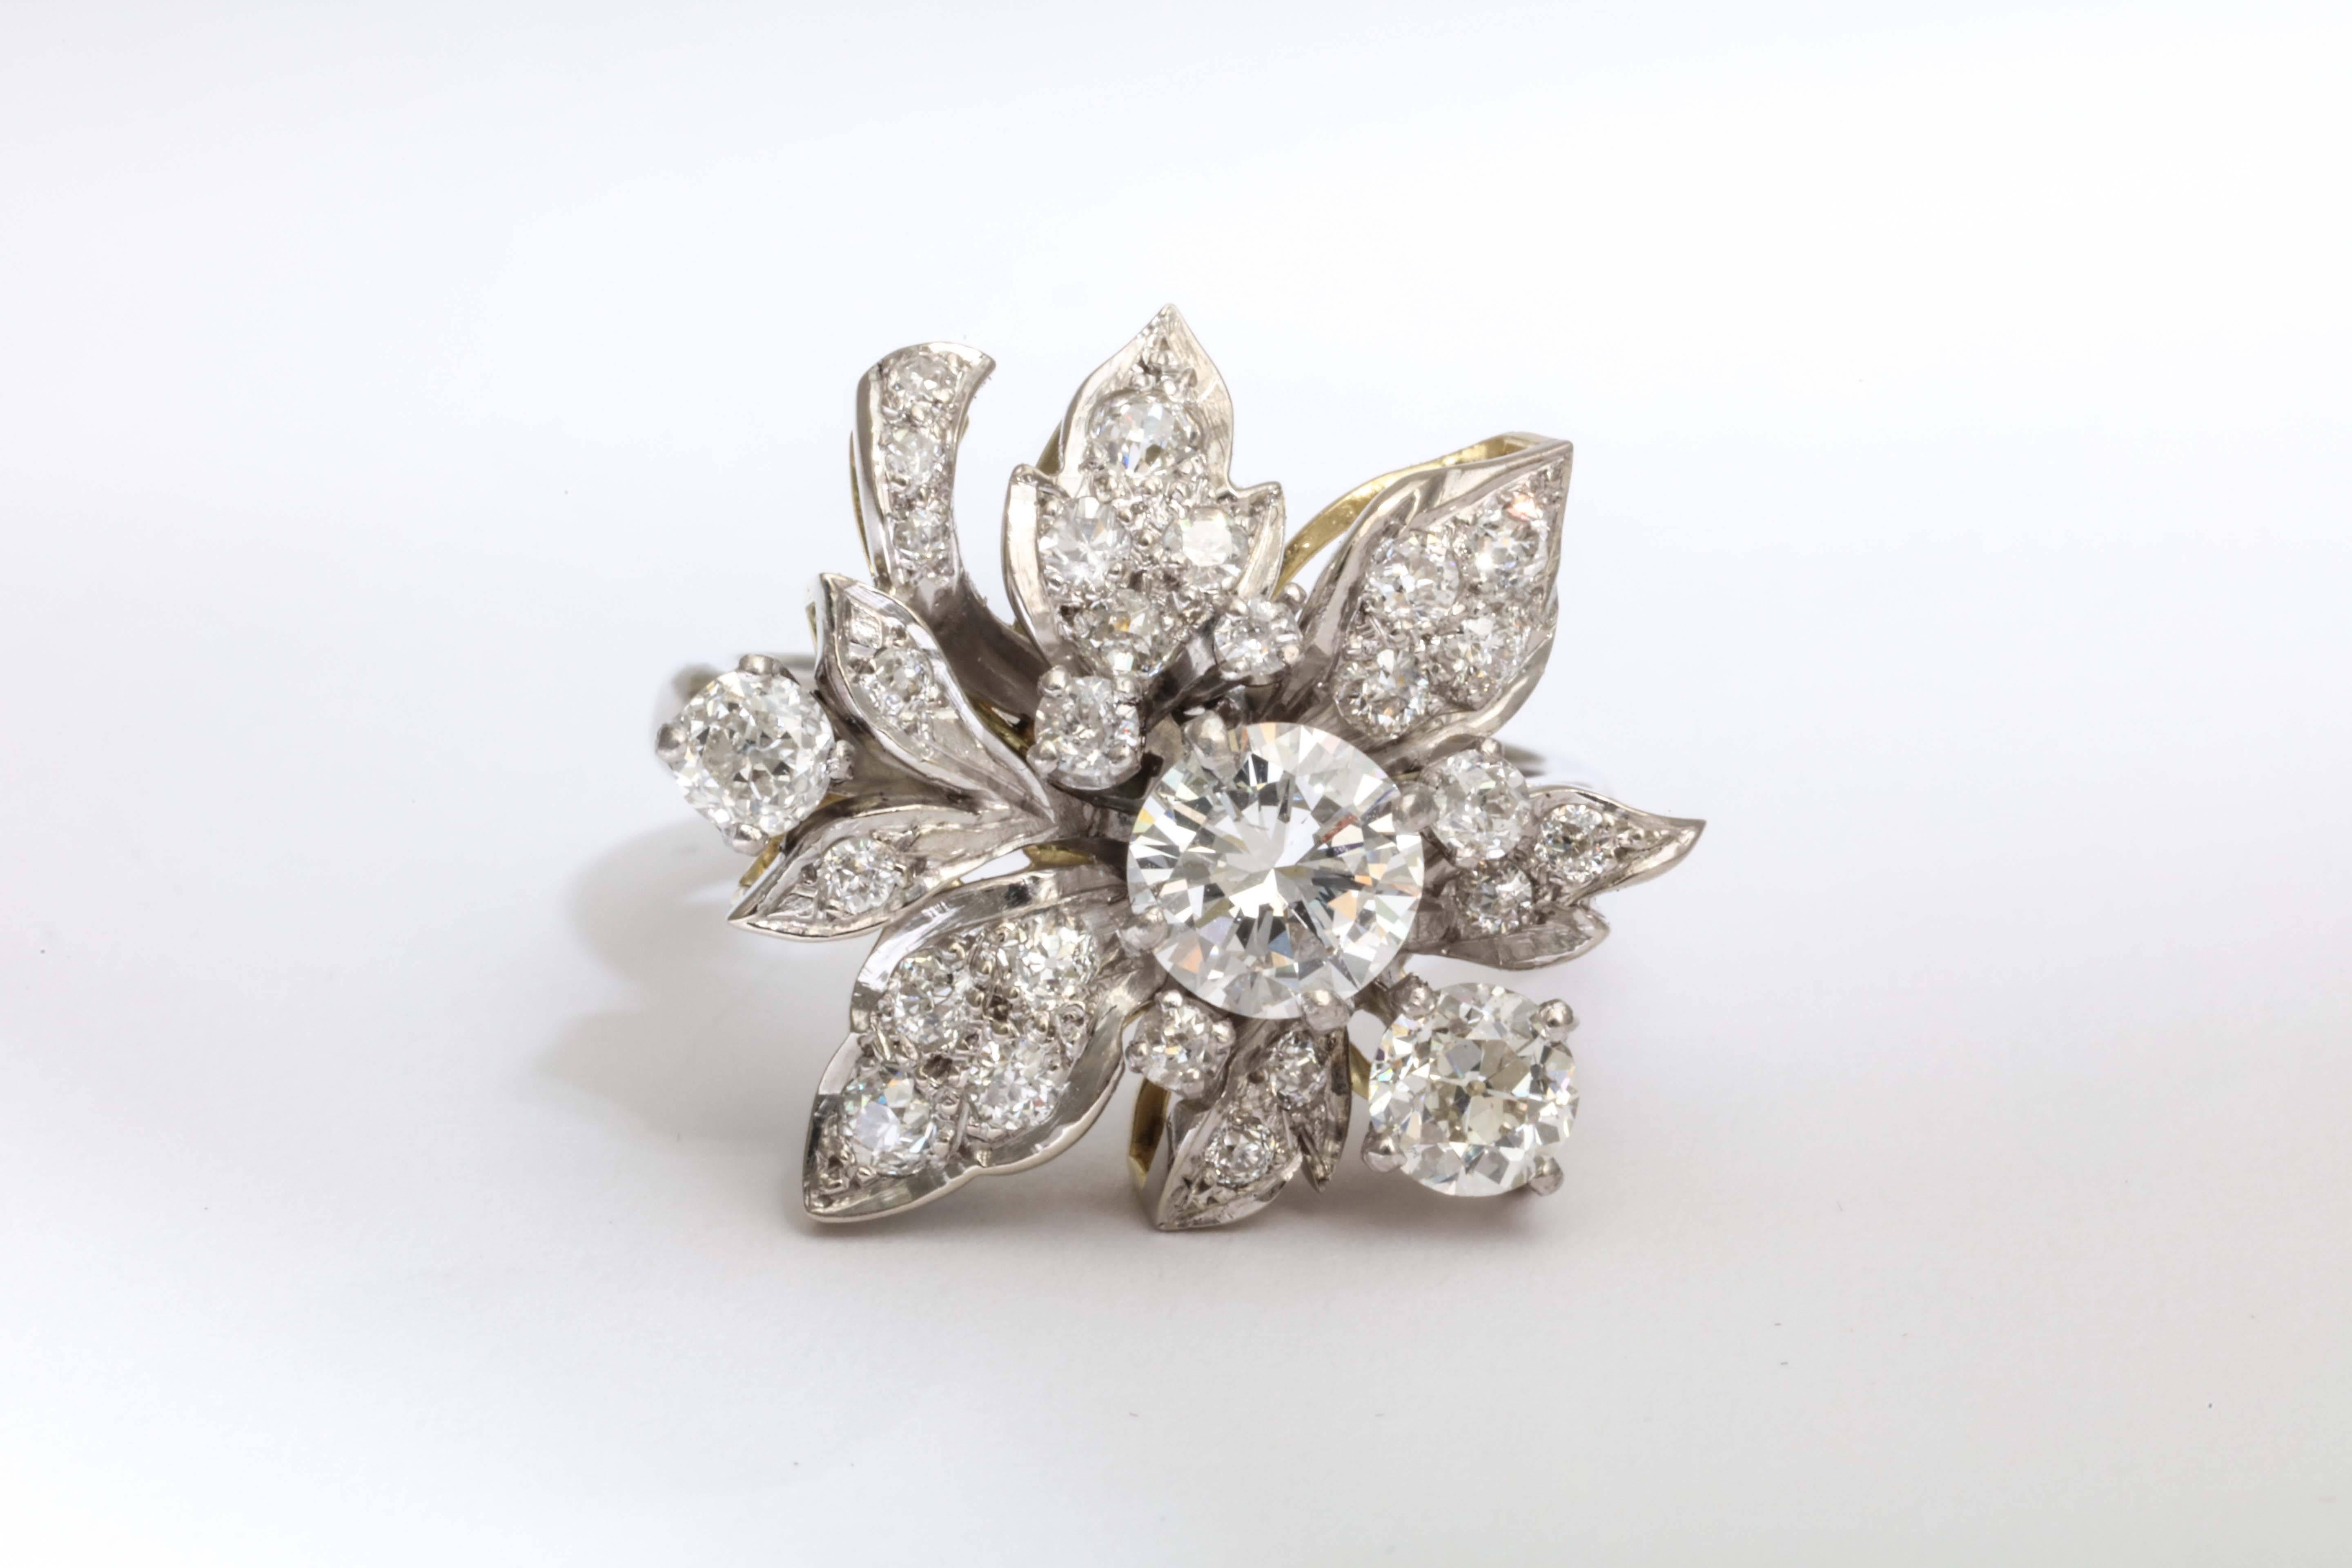 A stunning diamond and platinum flower ring with a center diamond of 1-carat with a total of 3-carat.